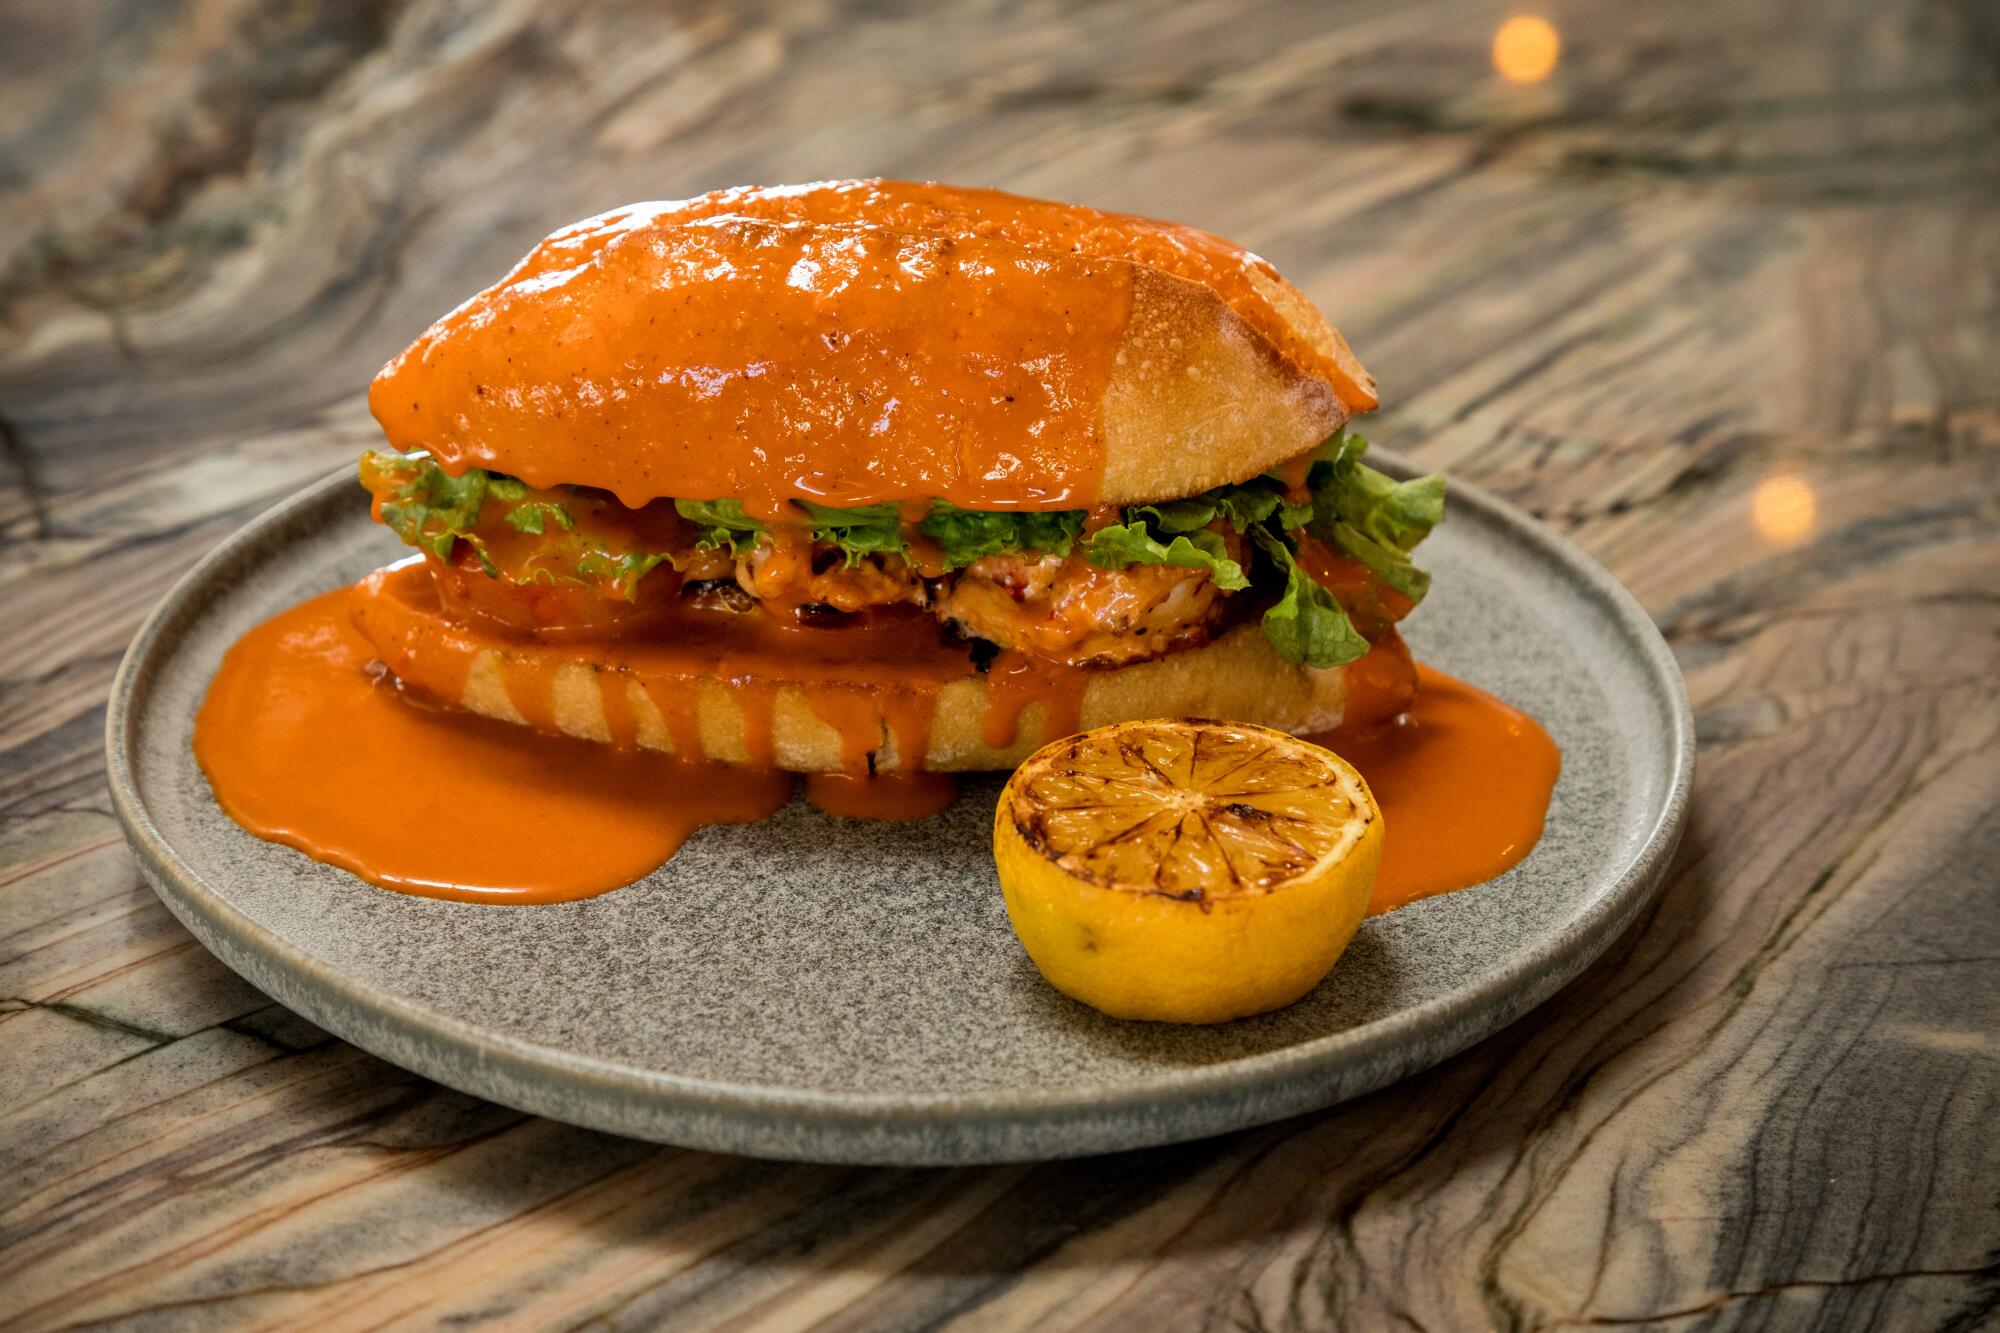 A sandwich on a plate covered in a red-orange sauce, with half a grilled lemon